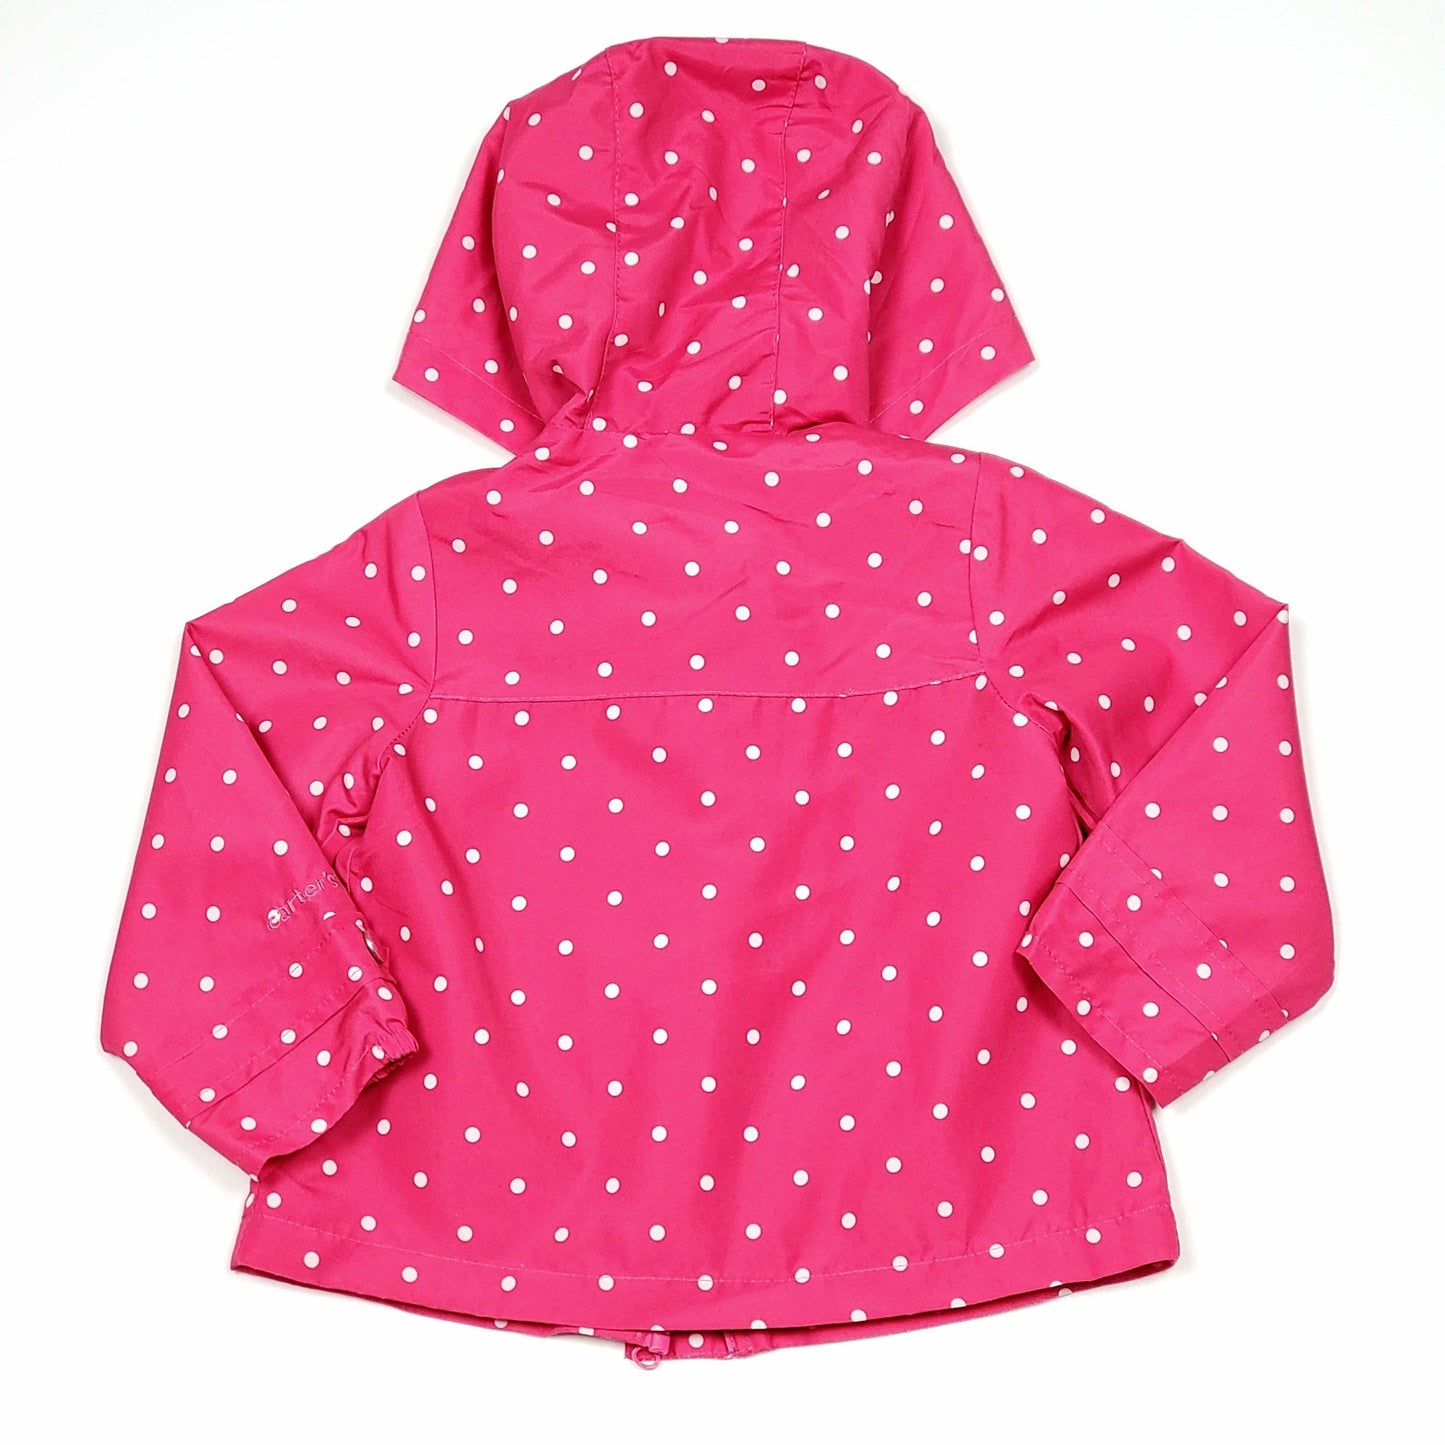 Carters Pink White Polka Dot Girls Jacket 2T Used View 4